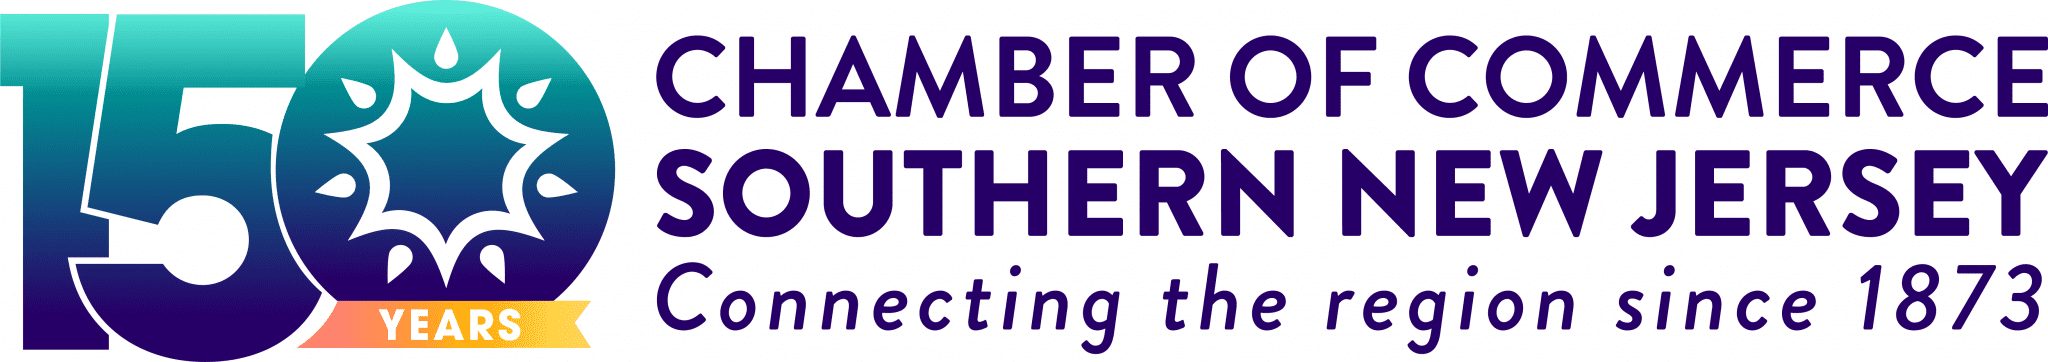 Chamber of Commerce Southern New Jersey Logo